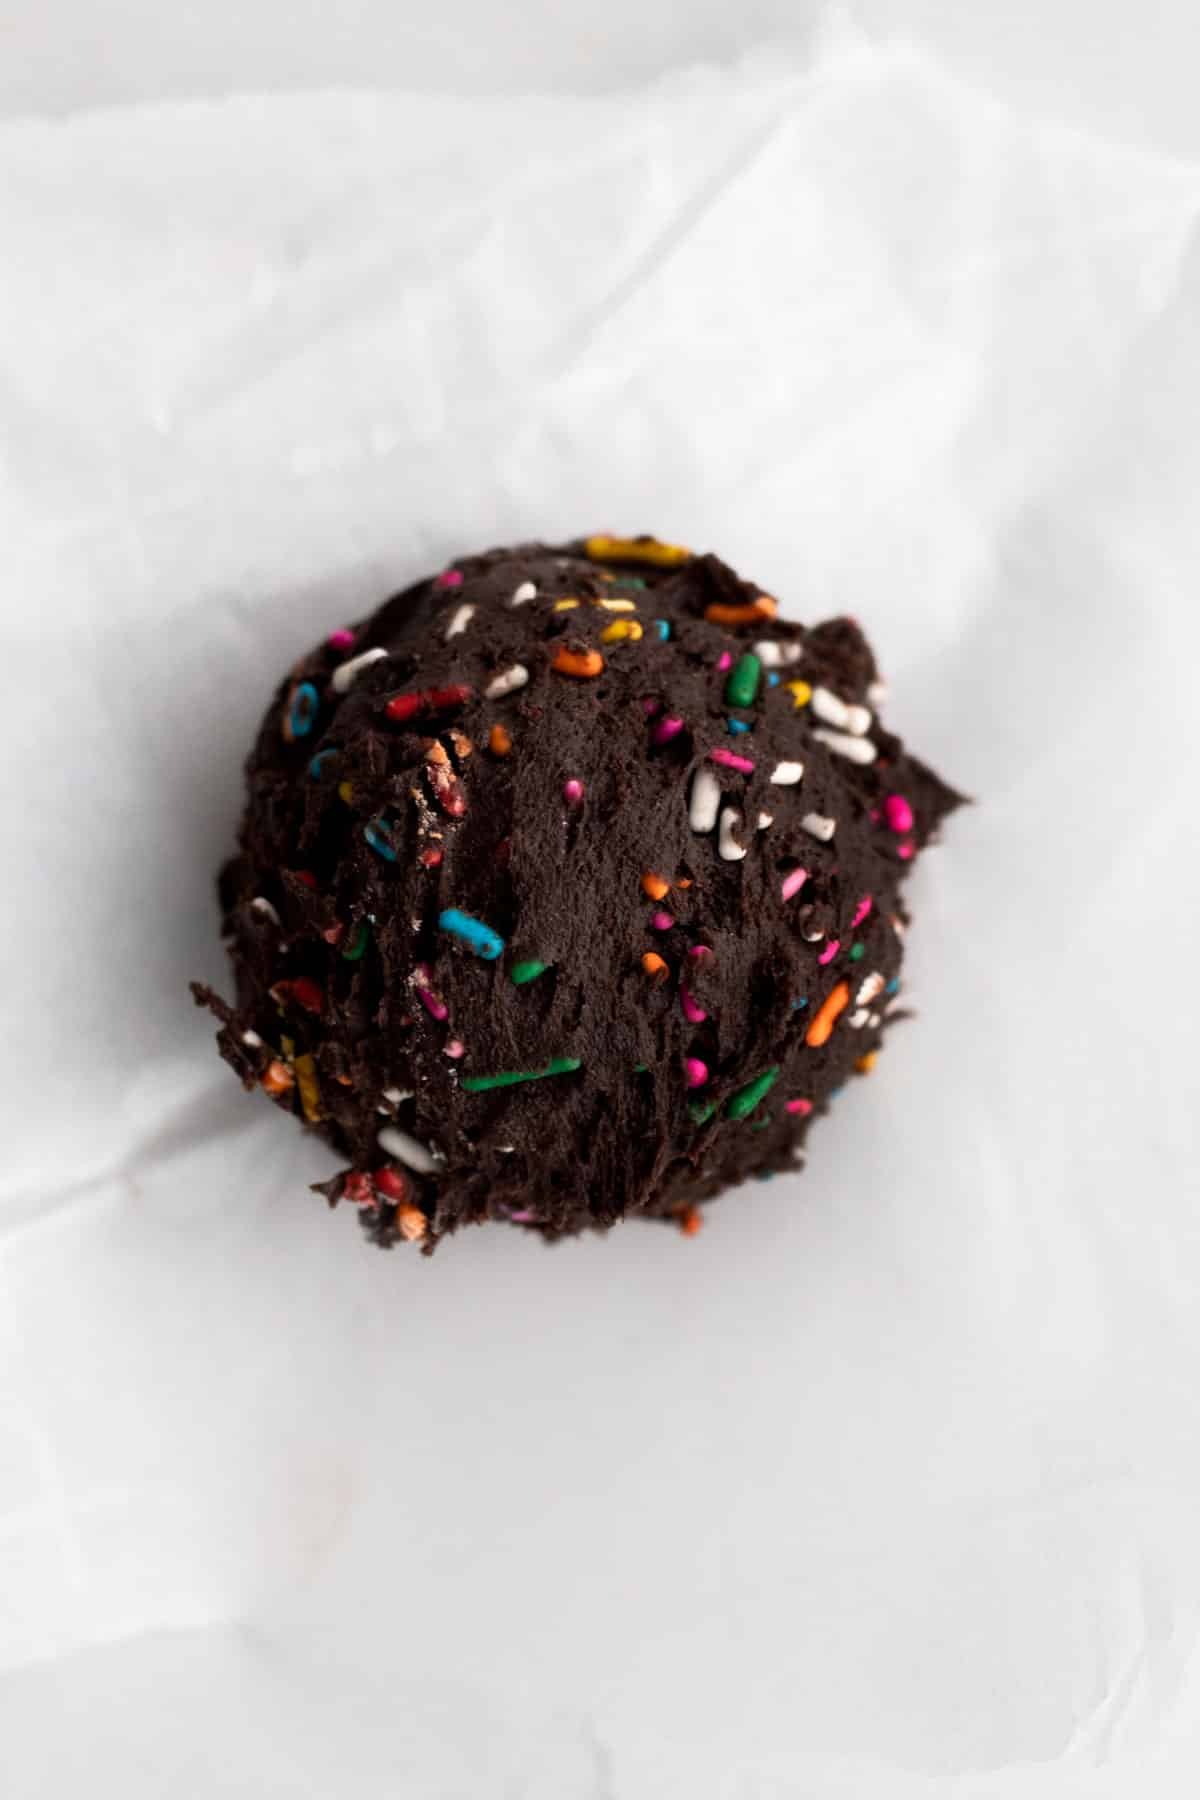 A ball of delicious chocolate cookie dough infused with rainbow sprinkles.